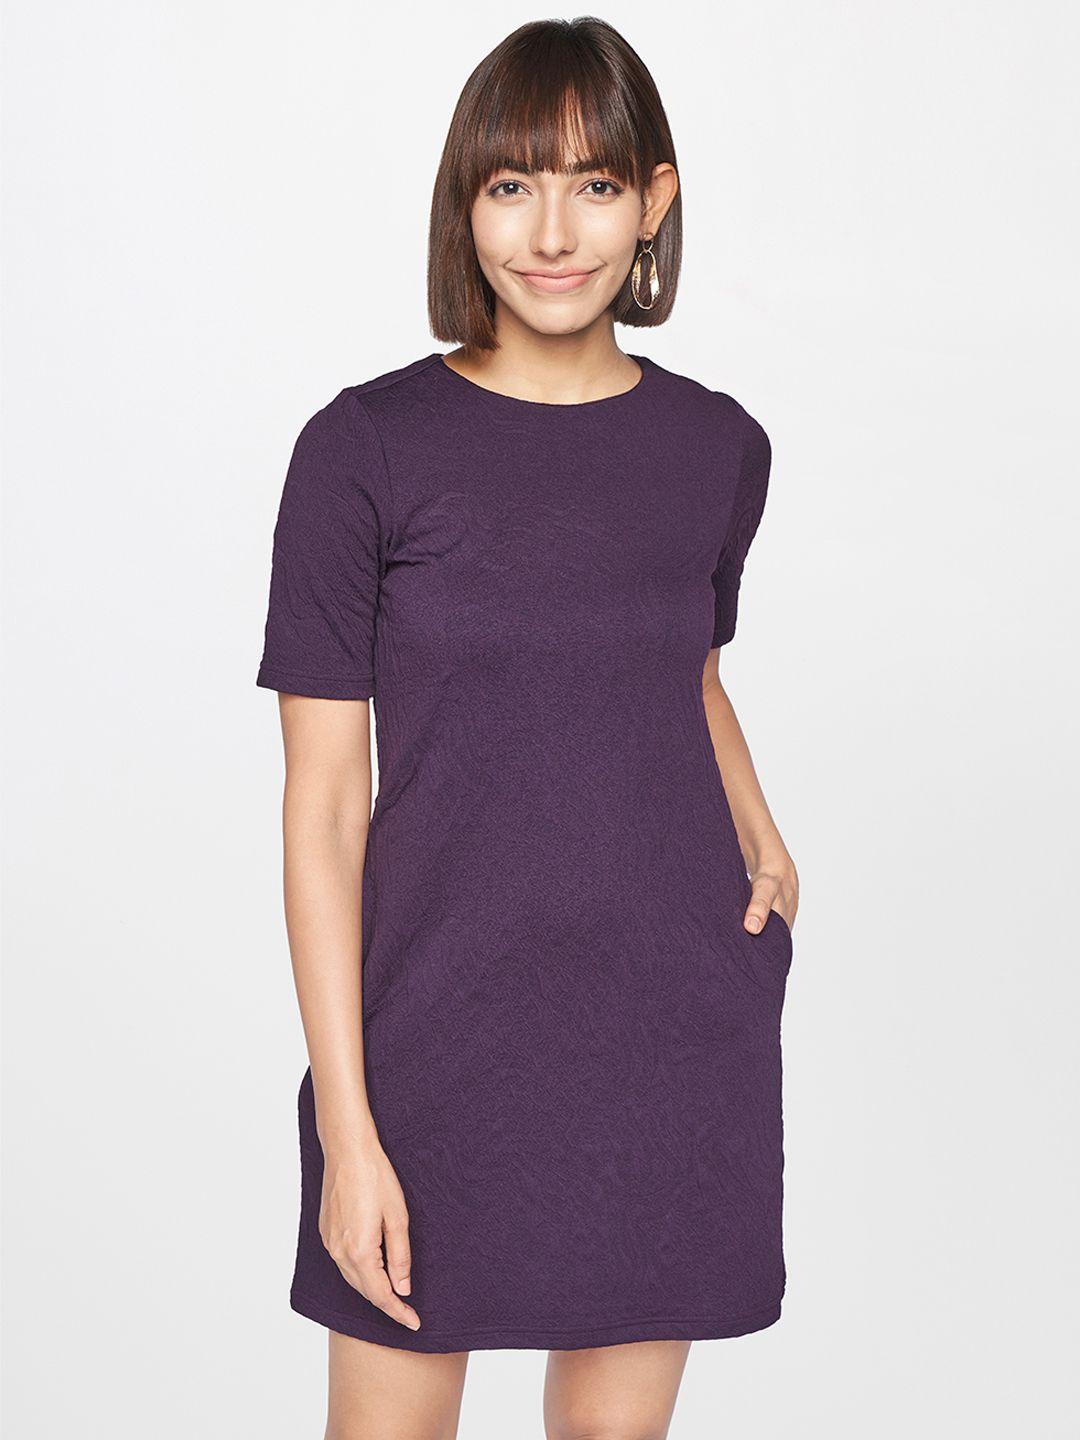 AND Violet Self-Design Bodycon Dress